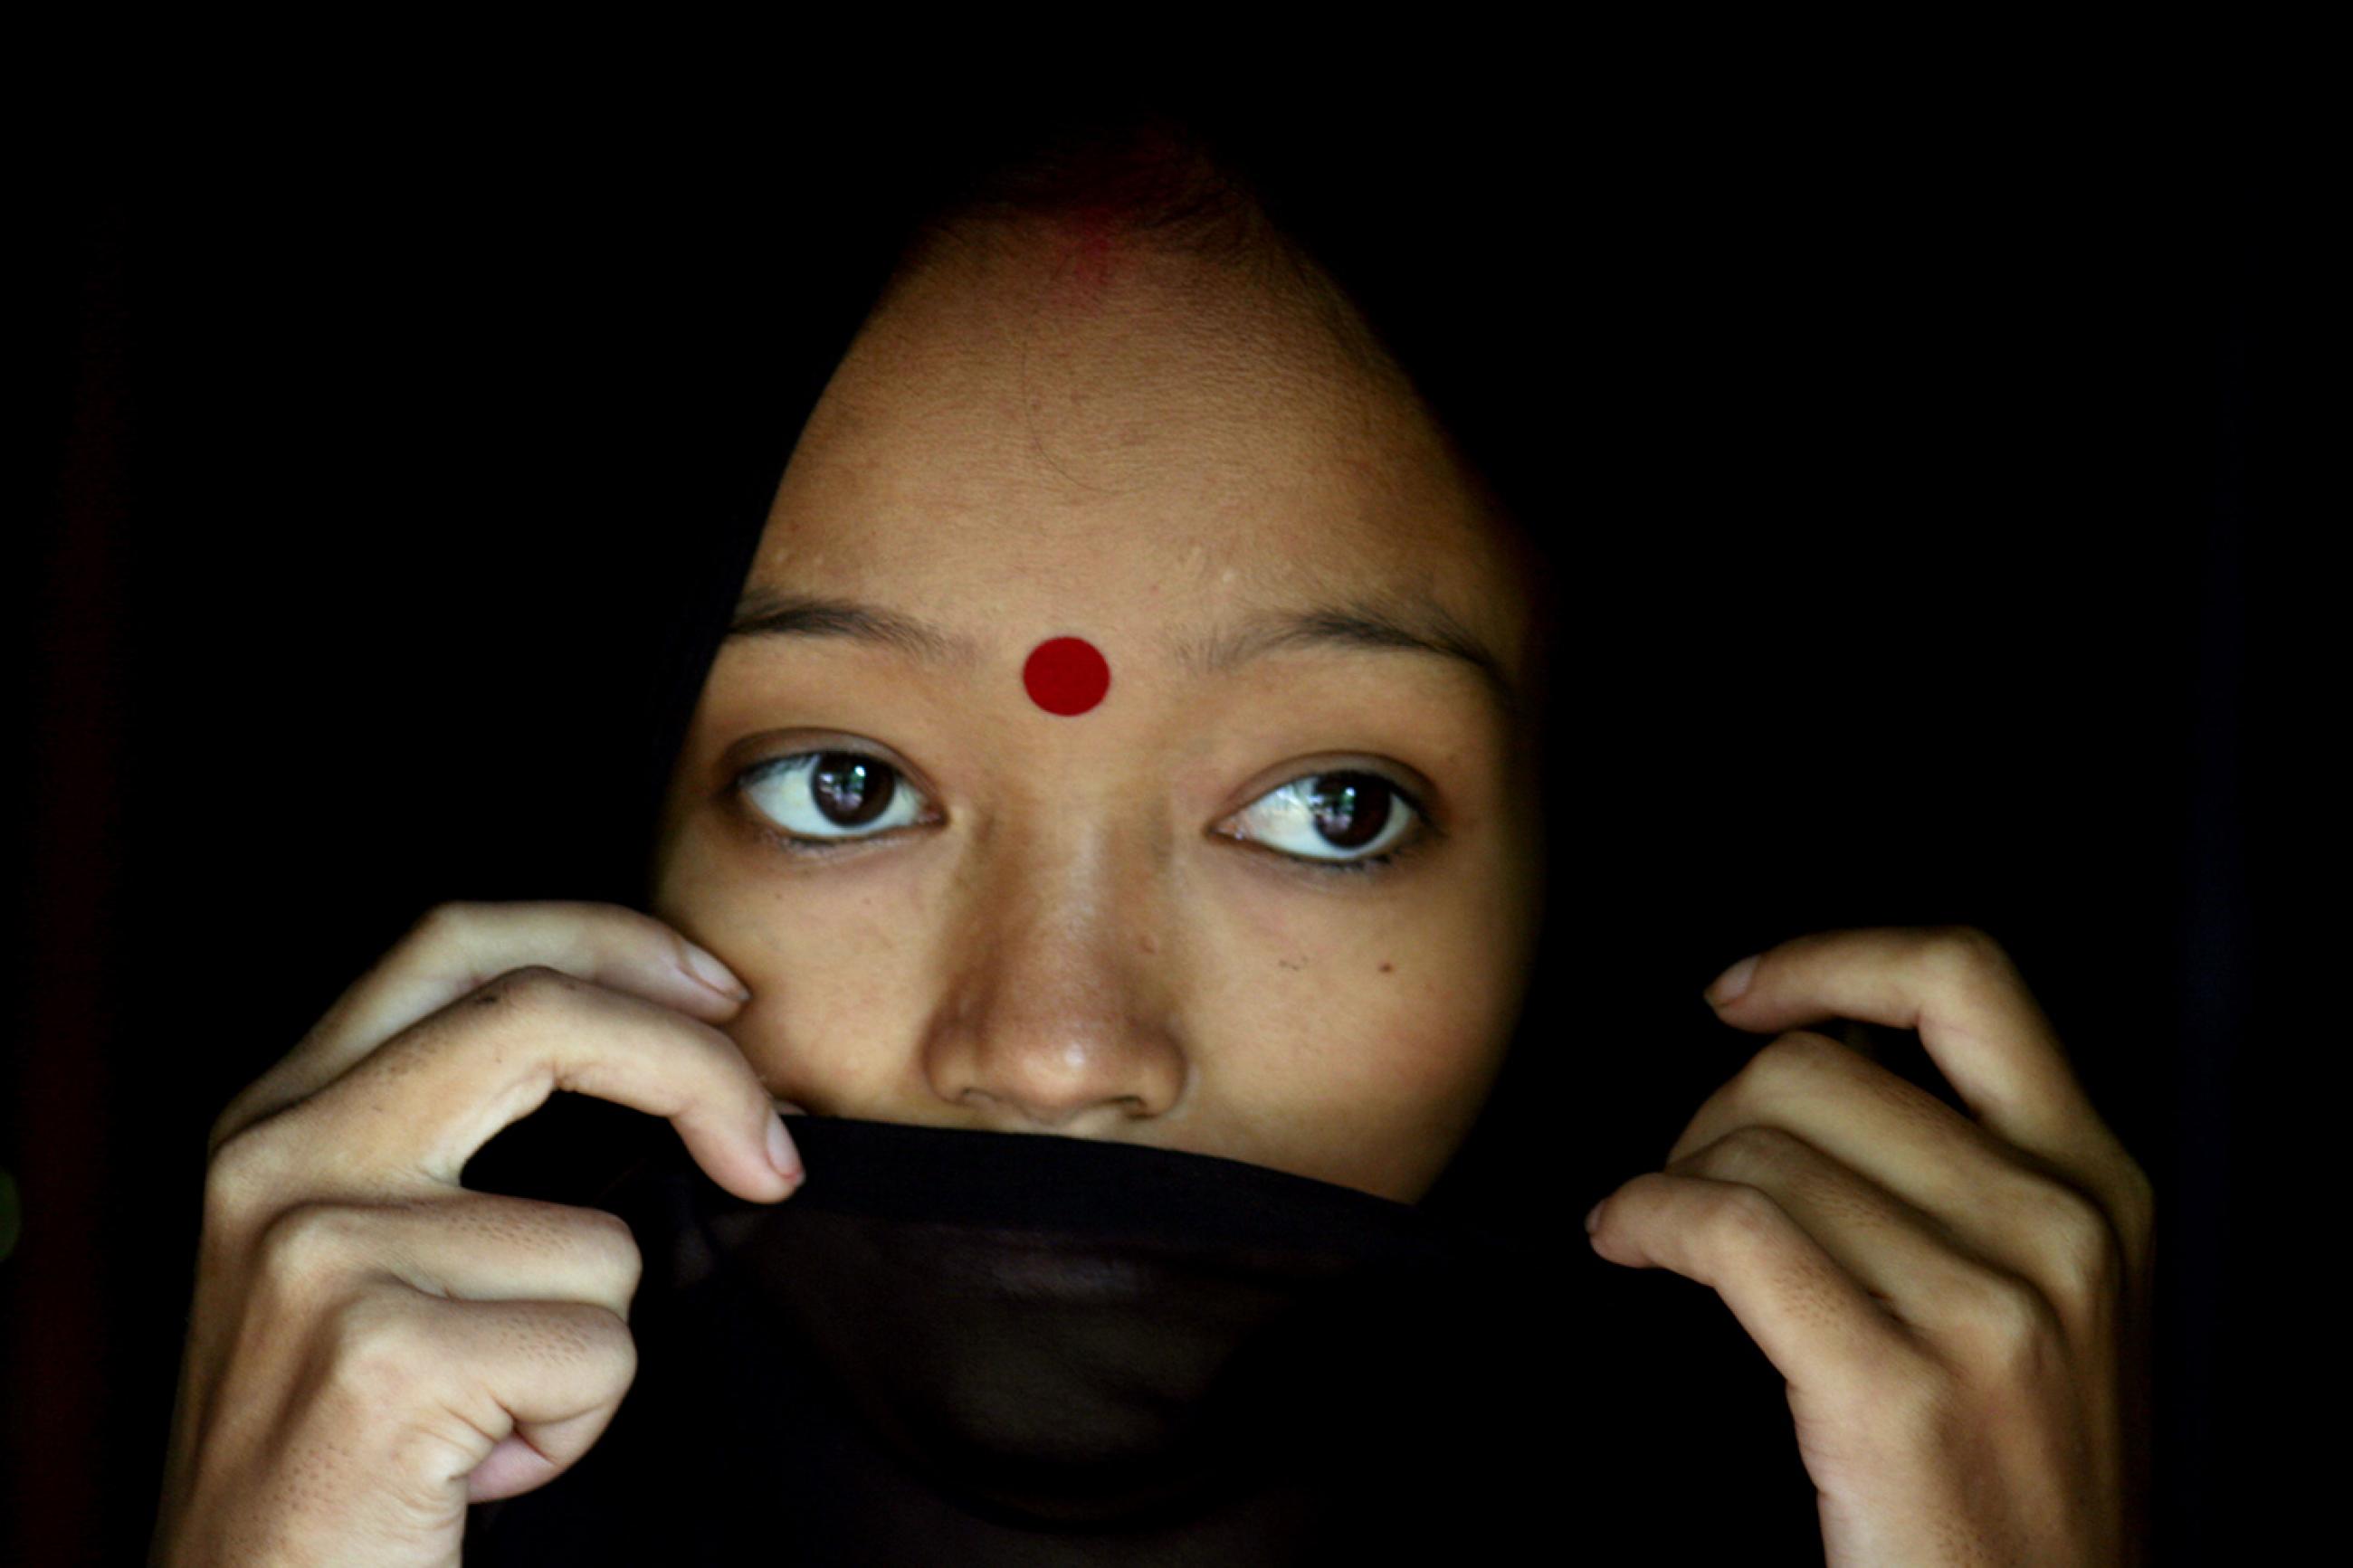 A woman living with HIV/AIDS stands in her hut in the northeastern Indian city of Siliguri on July 23, 2005. The photo shows the woman with a wrap covering her mouth. REUTERS/Rupak De Chowdhuri